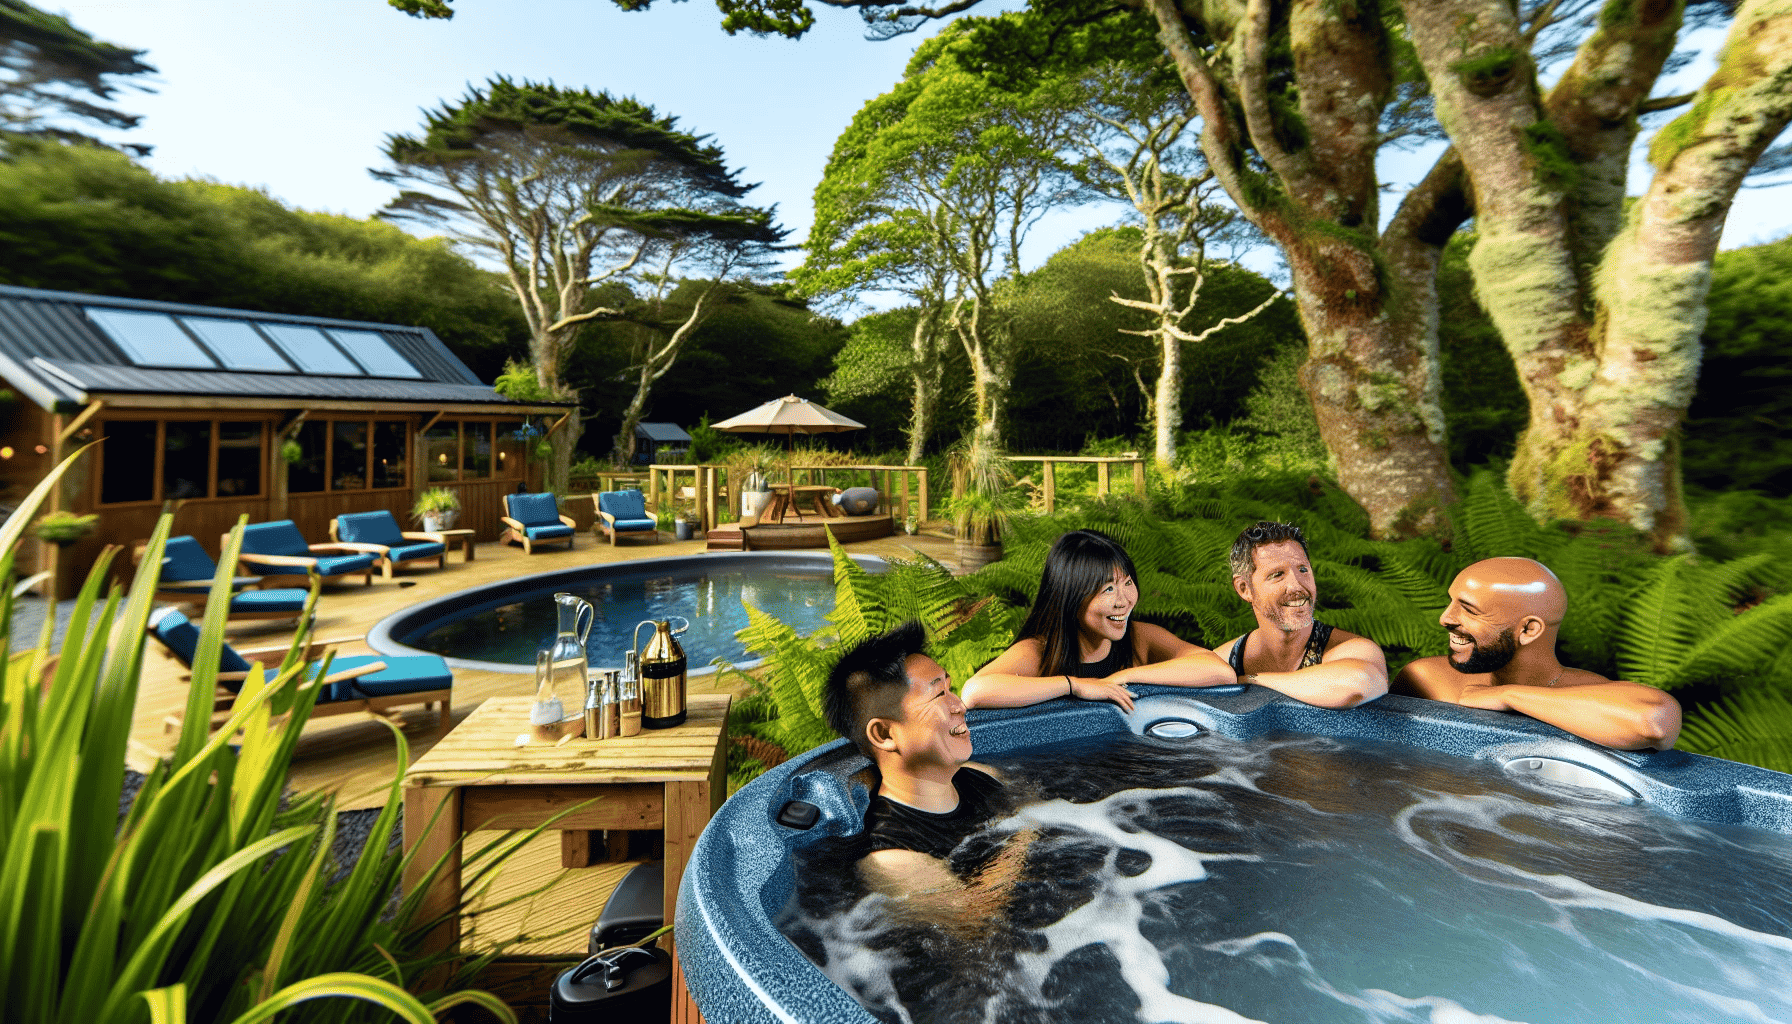 Relaxing in a hot tub at glamping accommodation in Northern Ireland